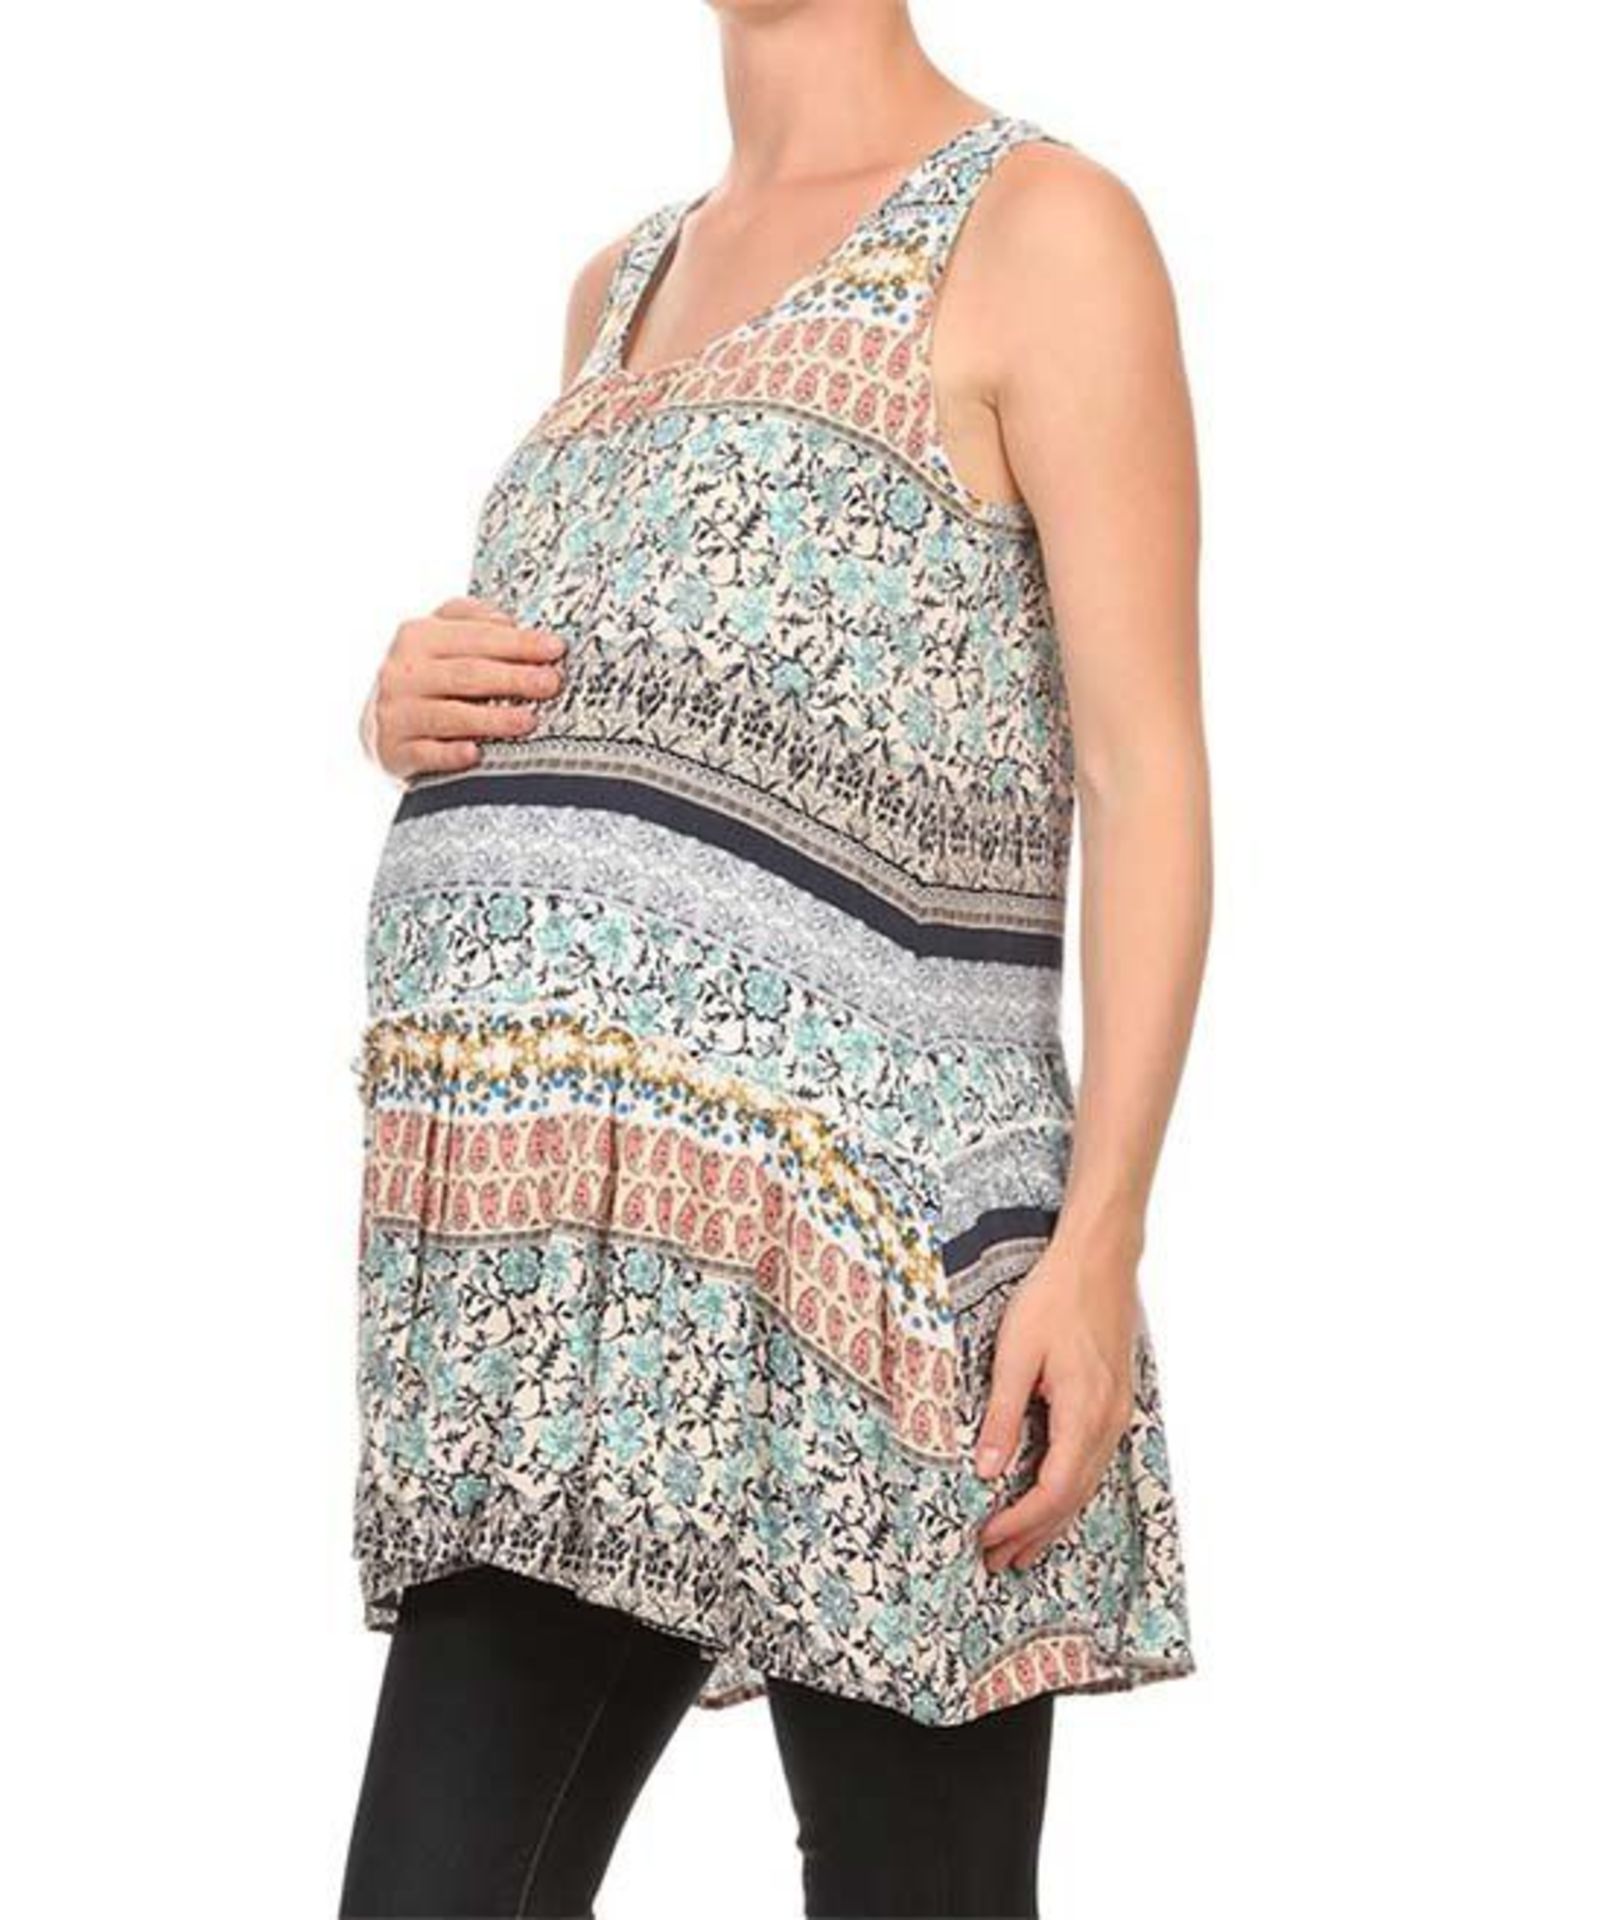 Chris & Carol Maternity Ivory & Mint Abstract Sleeveless Tunic (Uk 16: Us 12) (New with tags) [ - Image 2 of 3